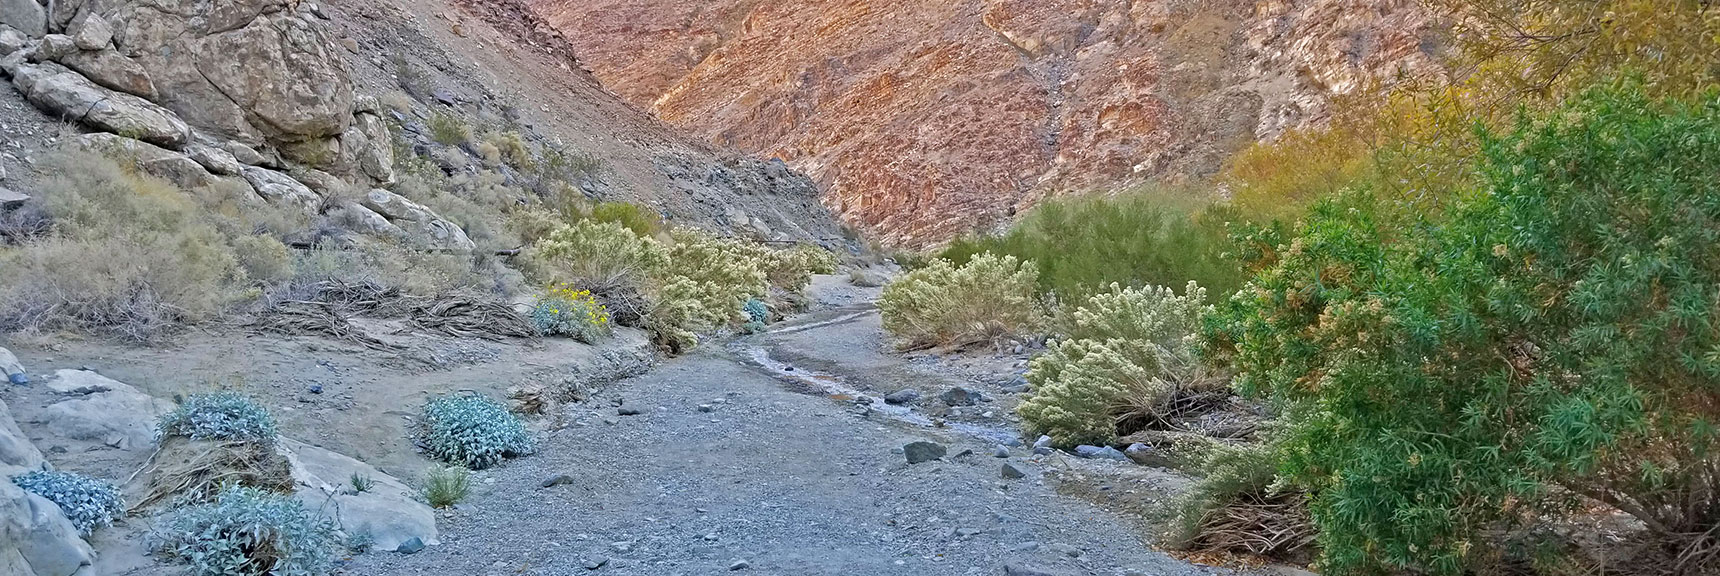 View Back Down the Canyon. Now the Path Borders a Small Forest. | Darwin Falls, Death Valley National Park, California